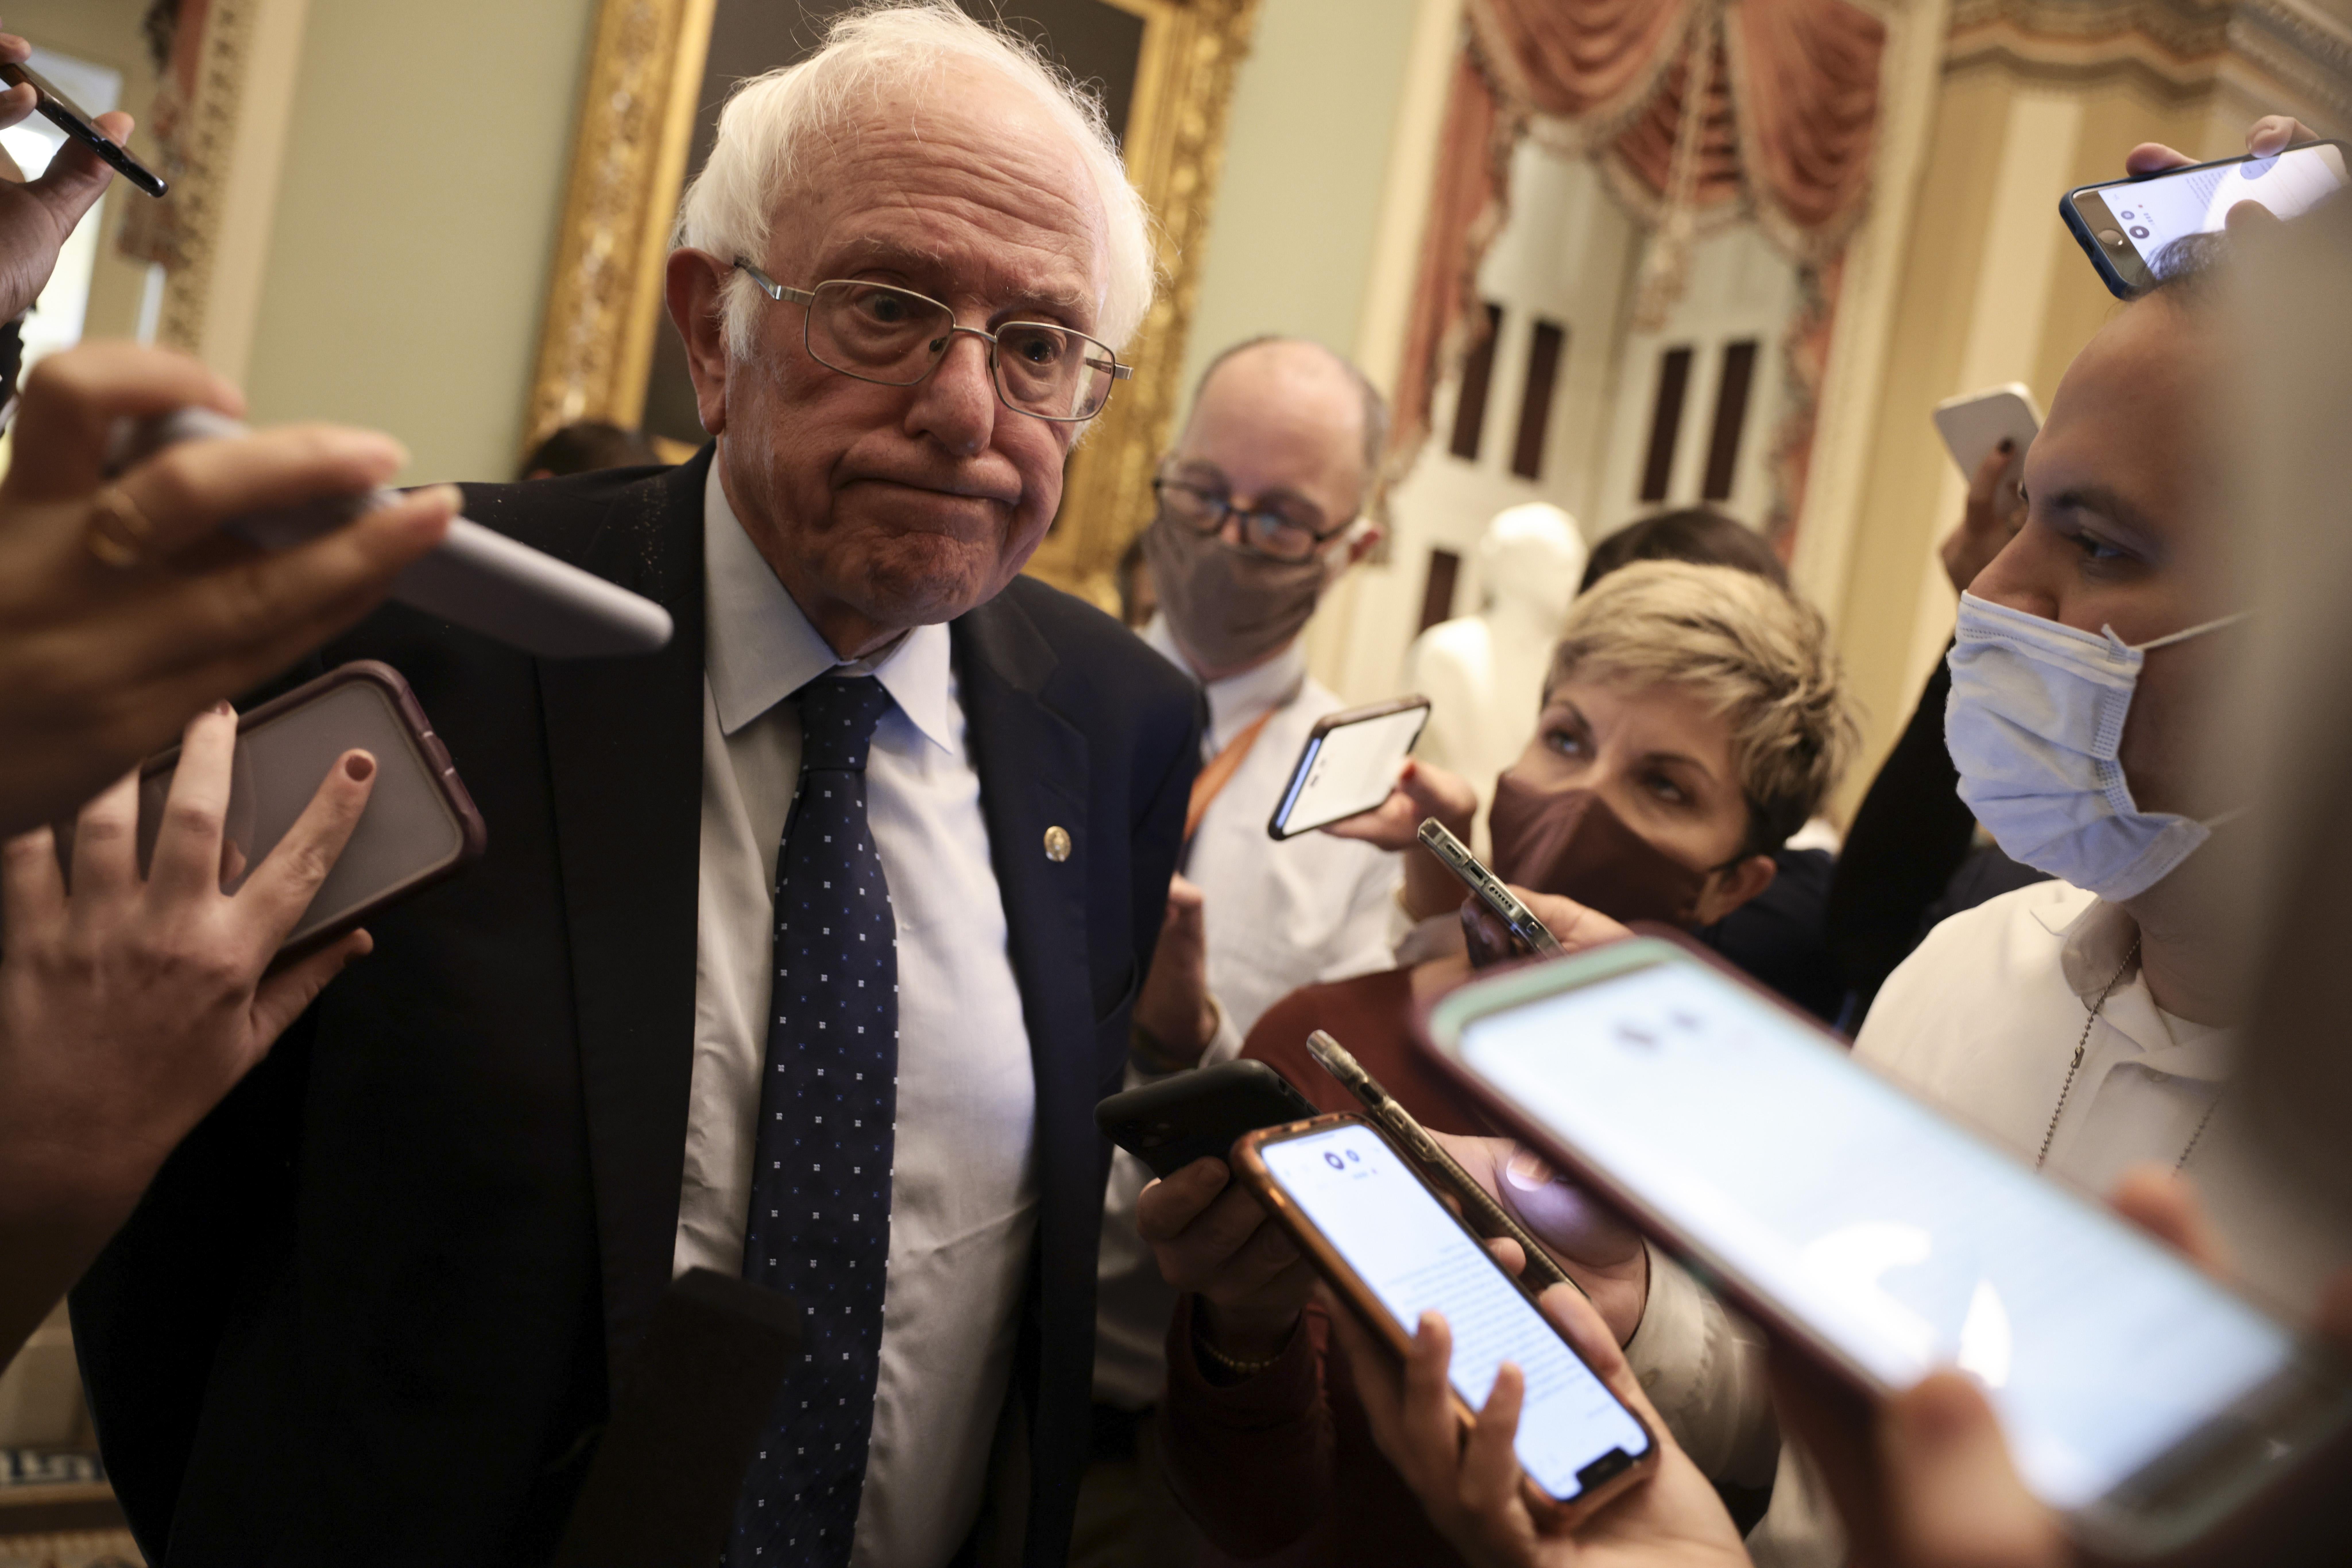 Bernie, surrounded by reporters holding phones, looking puzzled